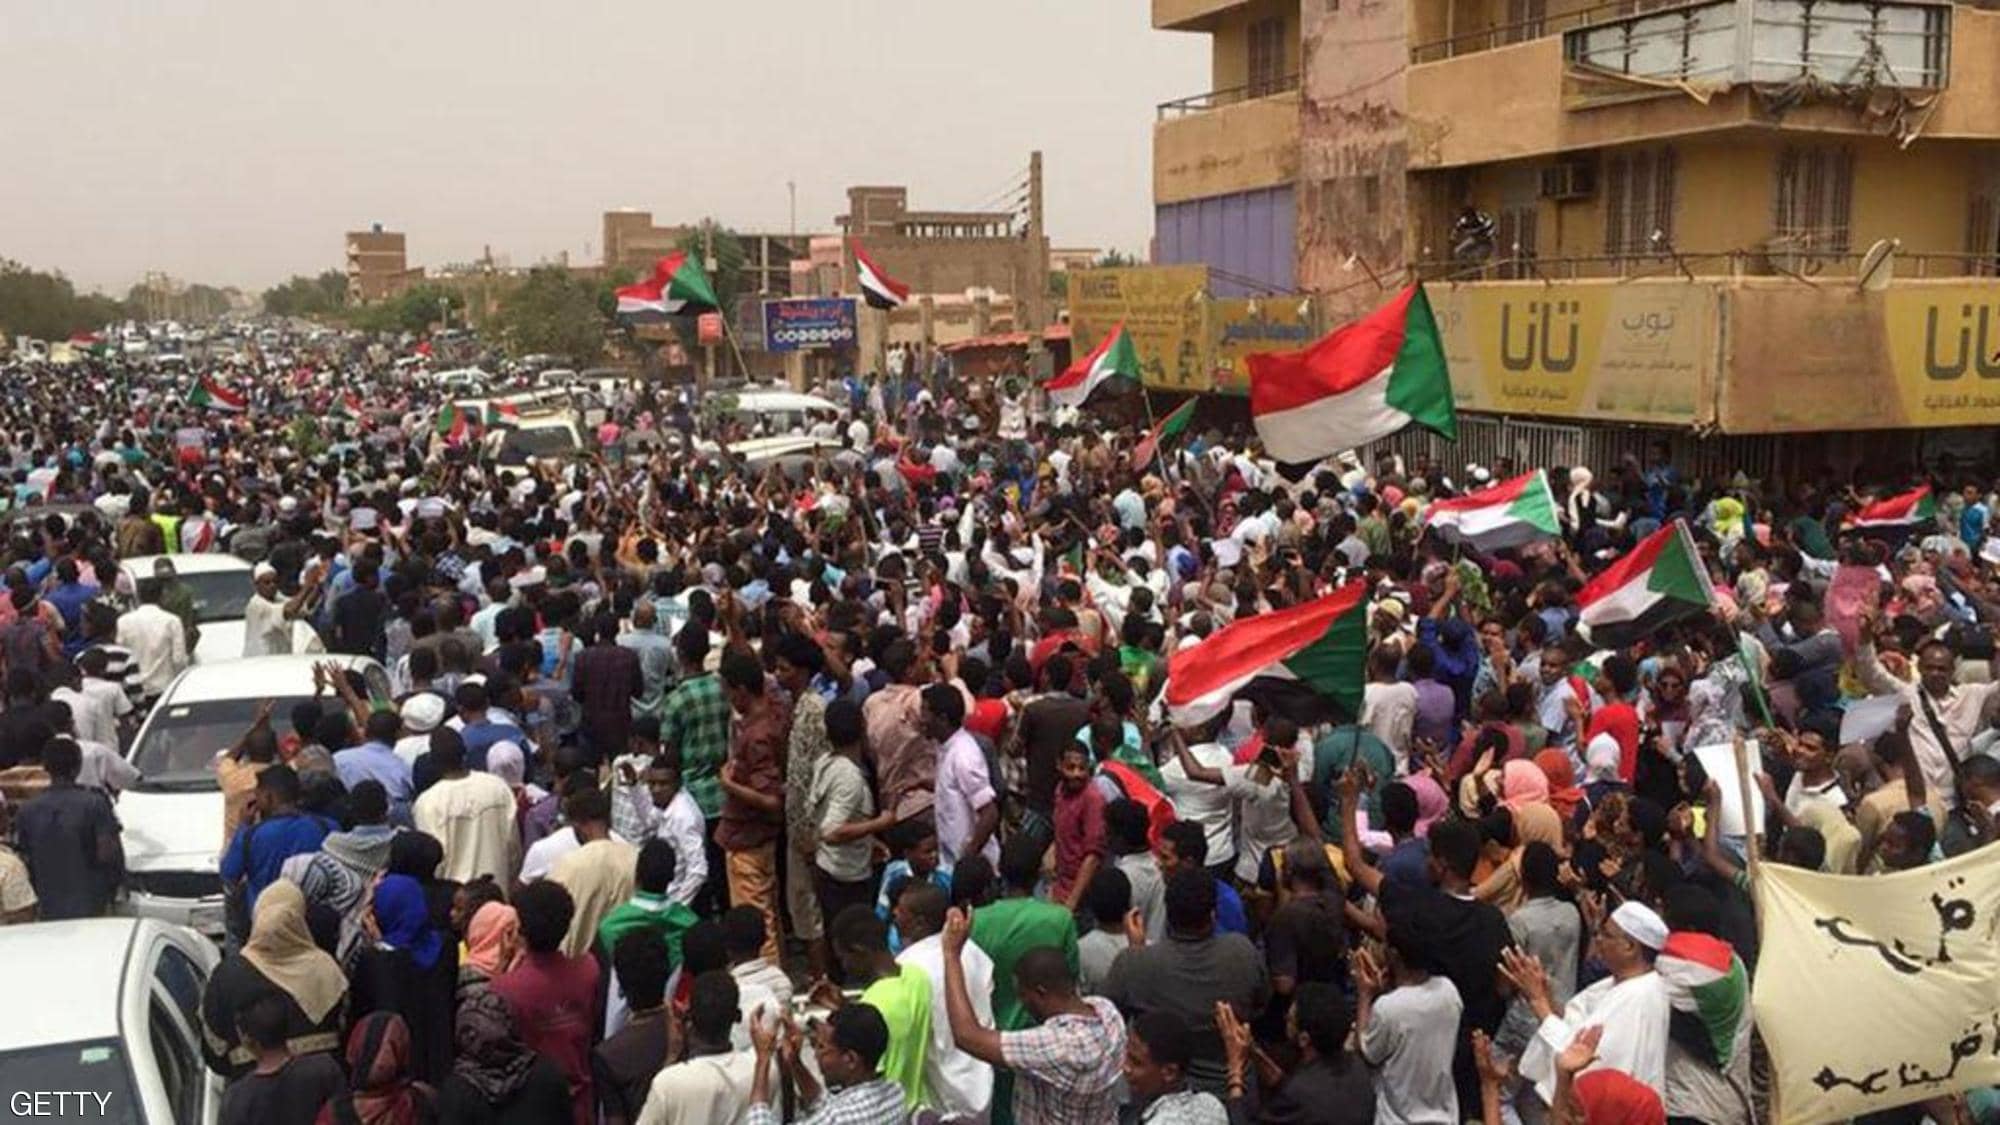 Sudanese Protesters call for govt resignation over IMF-backed reforms